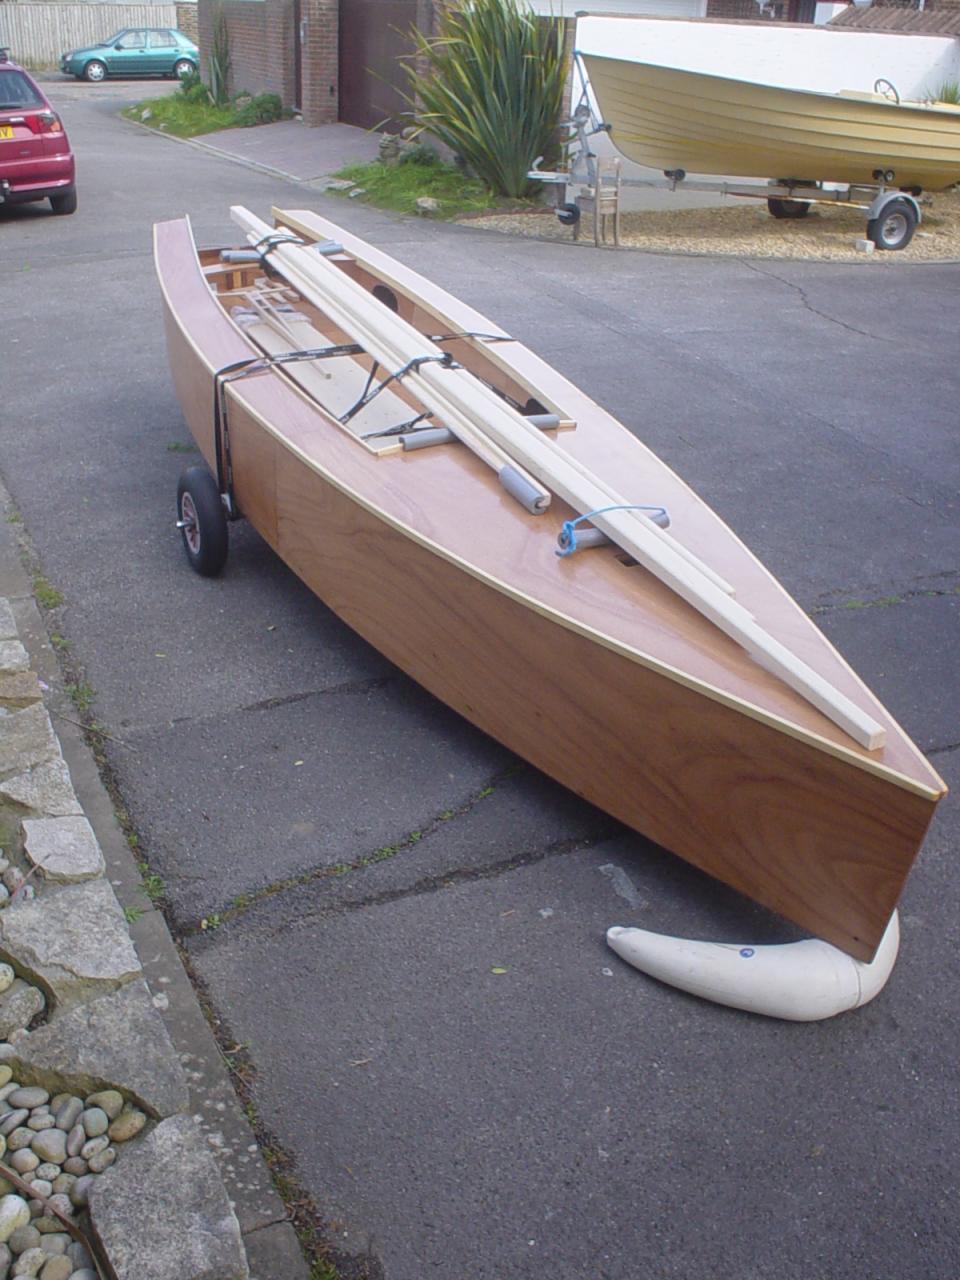 Gifted Amateur Boatbuilder Chris Perkins has laboured during some of 